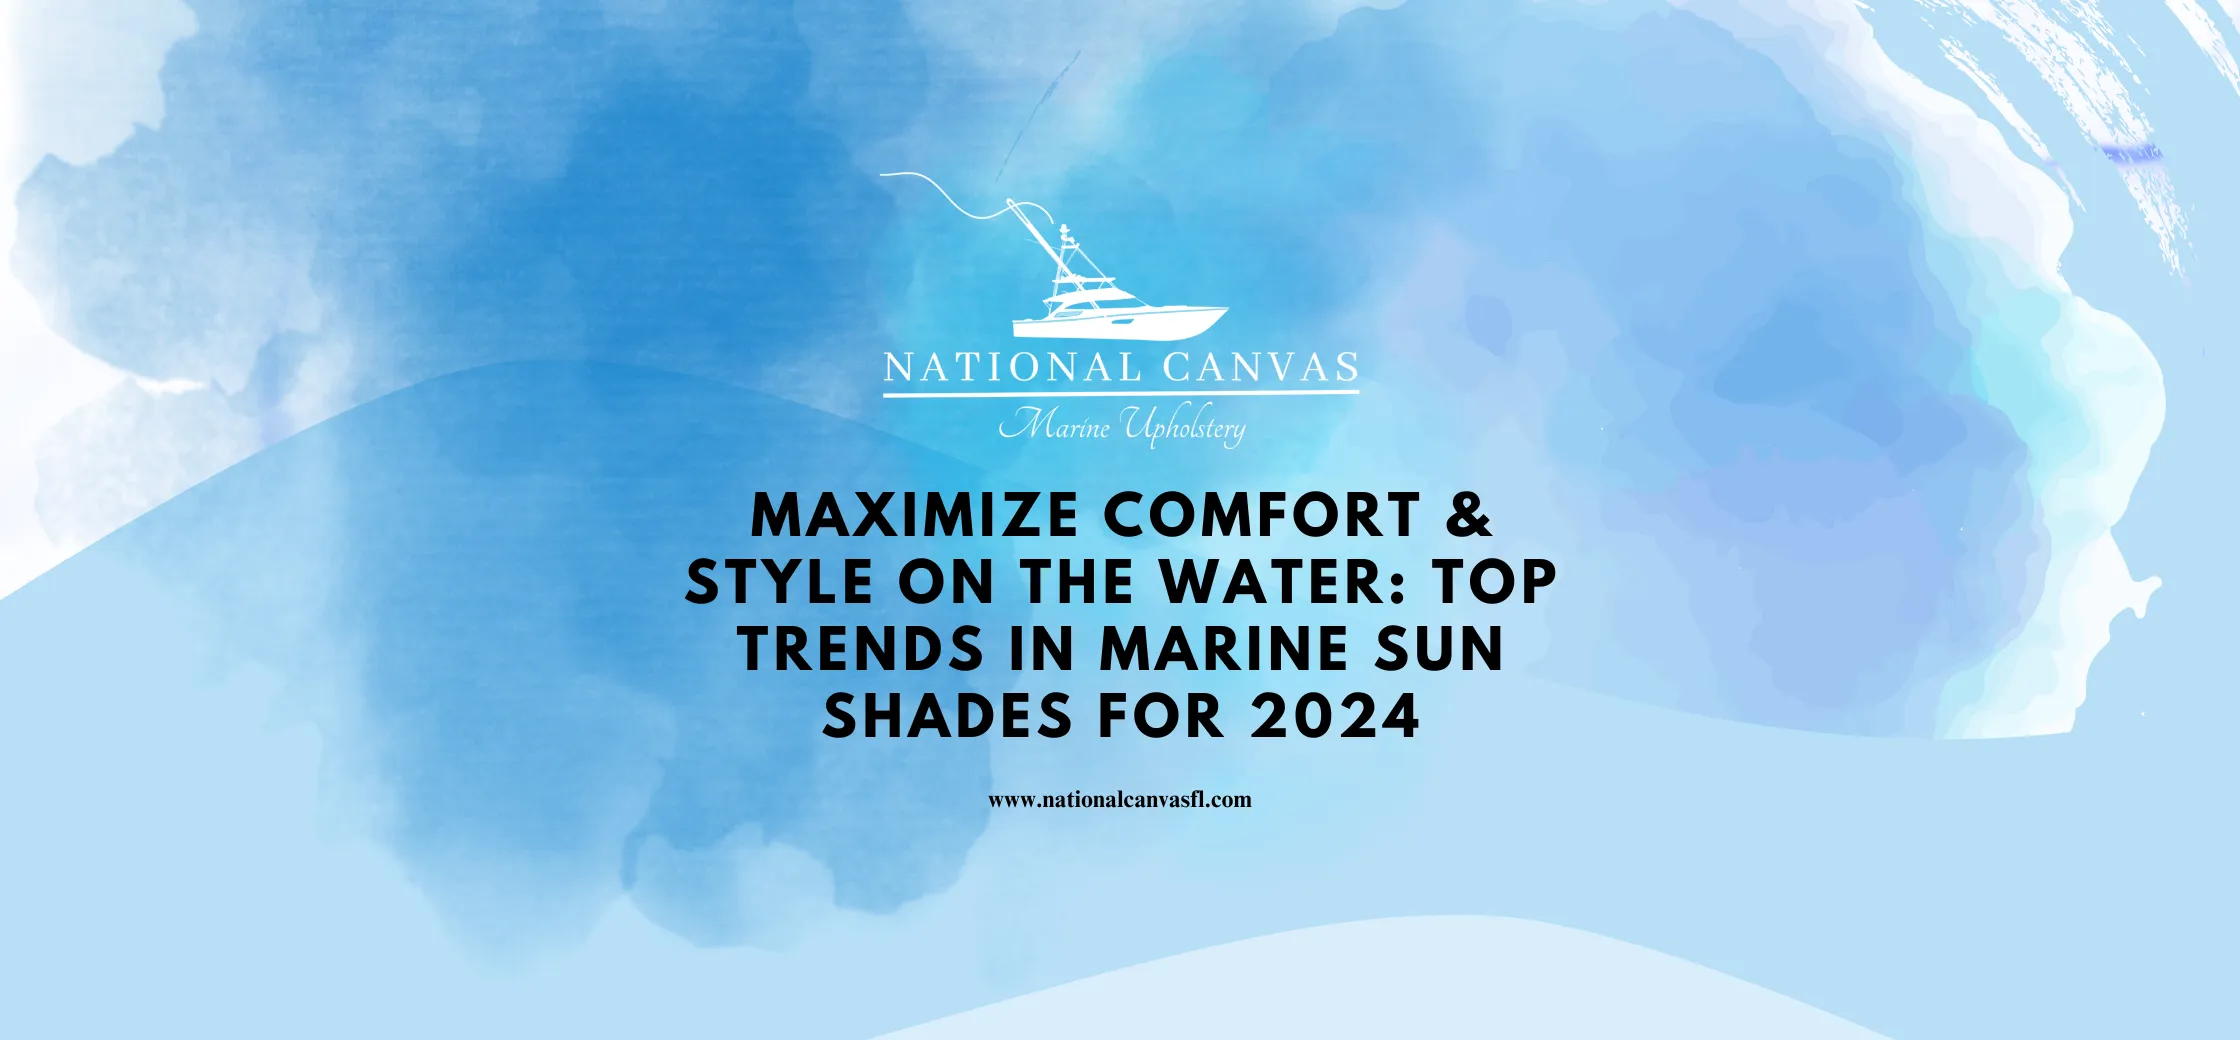 Maximize Comfort & Style on the Water_ Top Trends in Marine Sun Shades for 2024